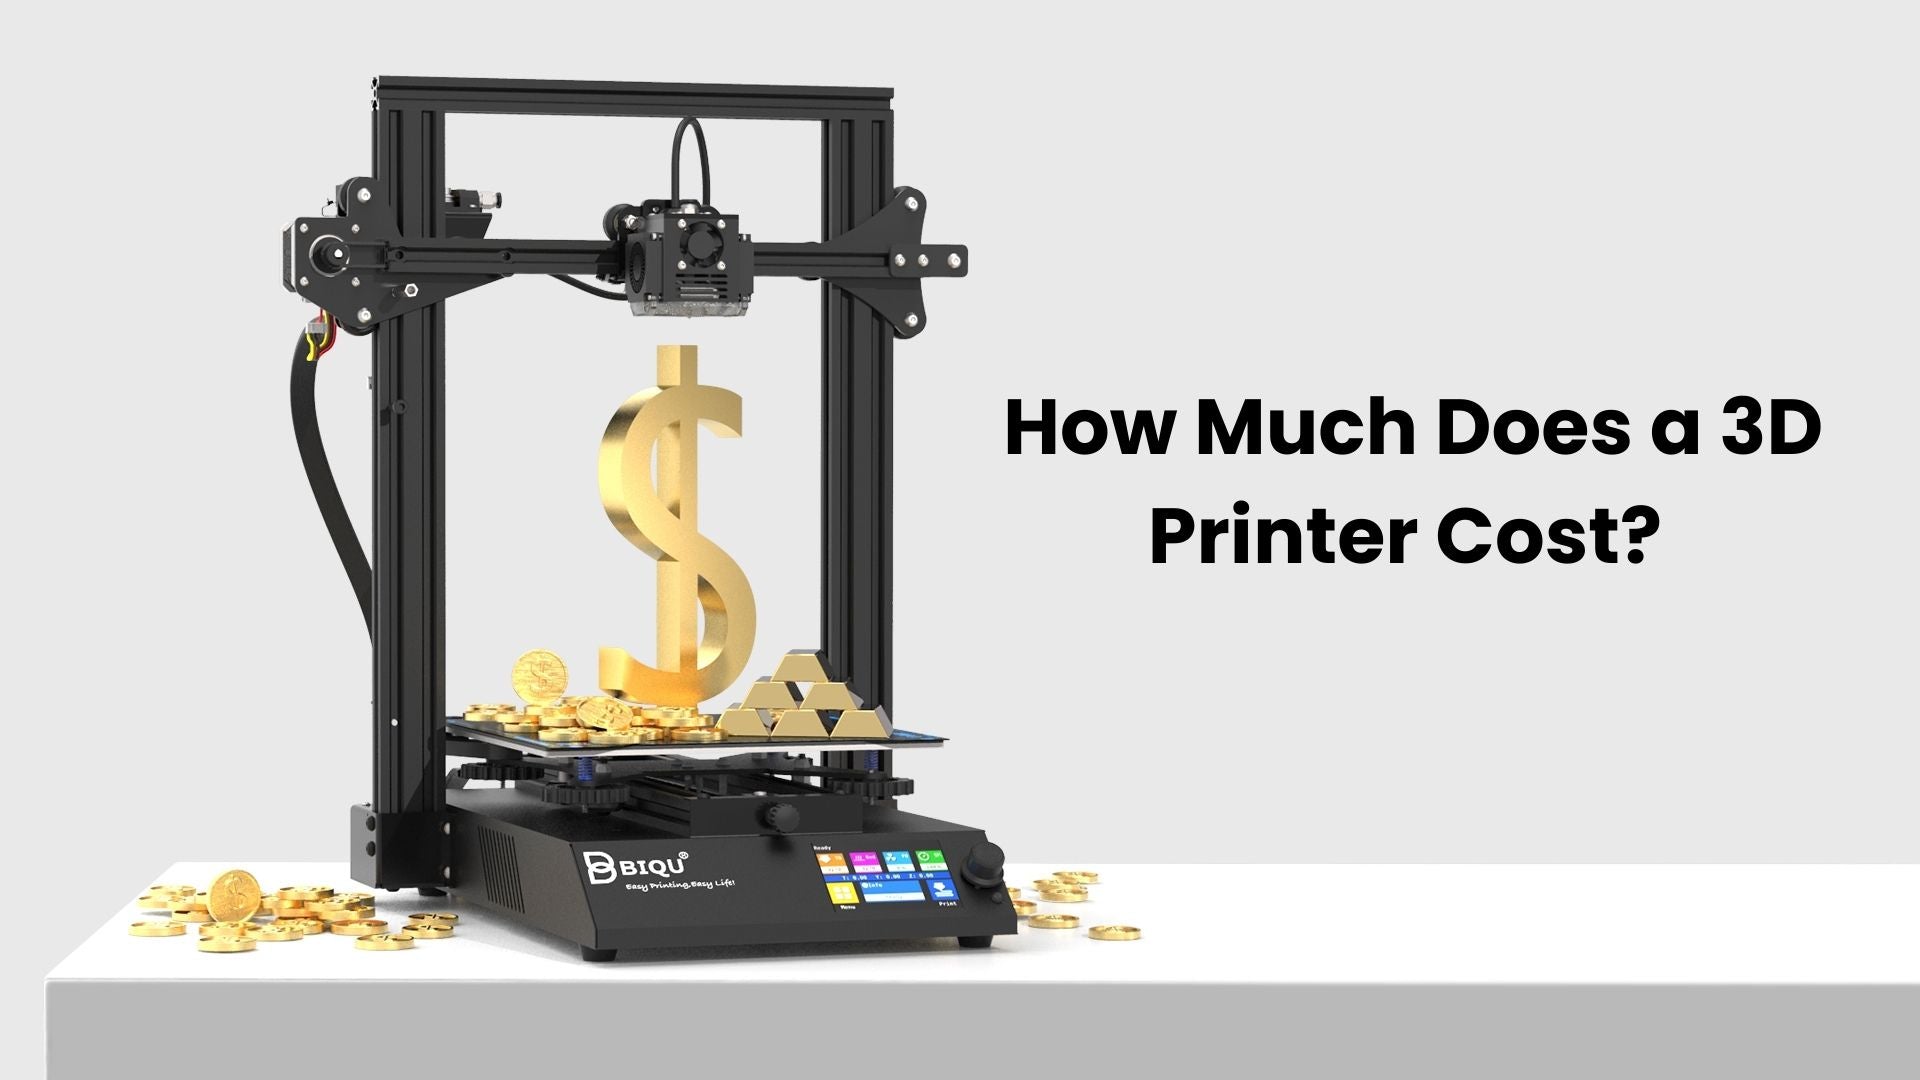 How much does a 3D Printer Cost BIQU 3D Printing